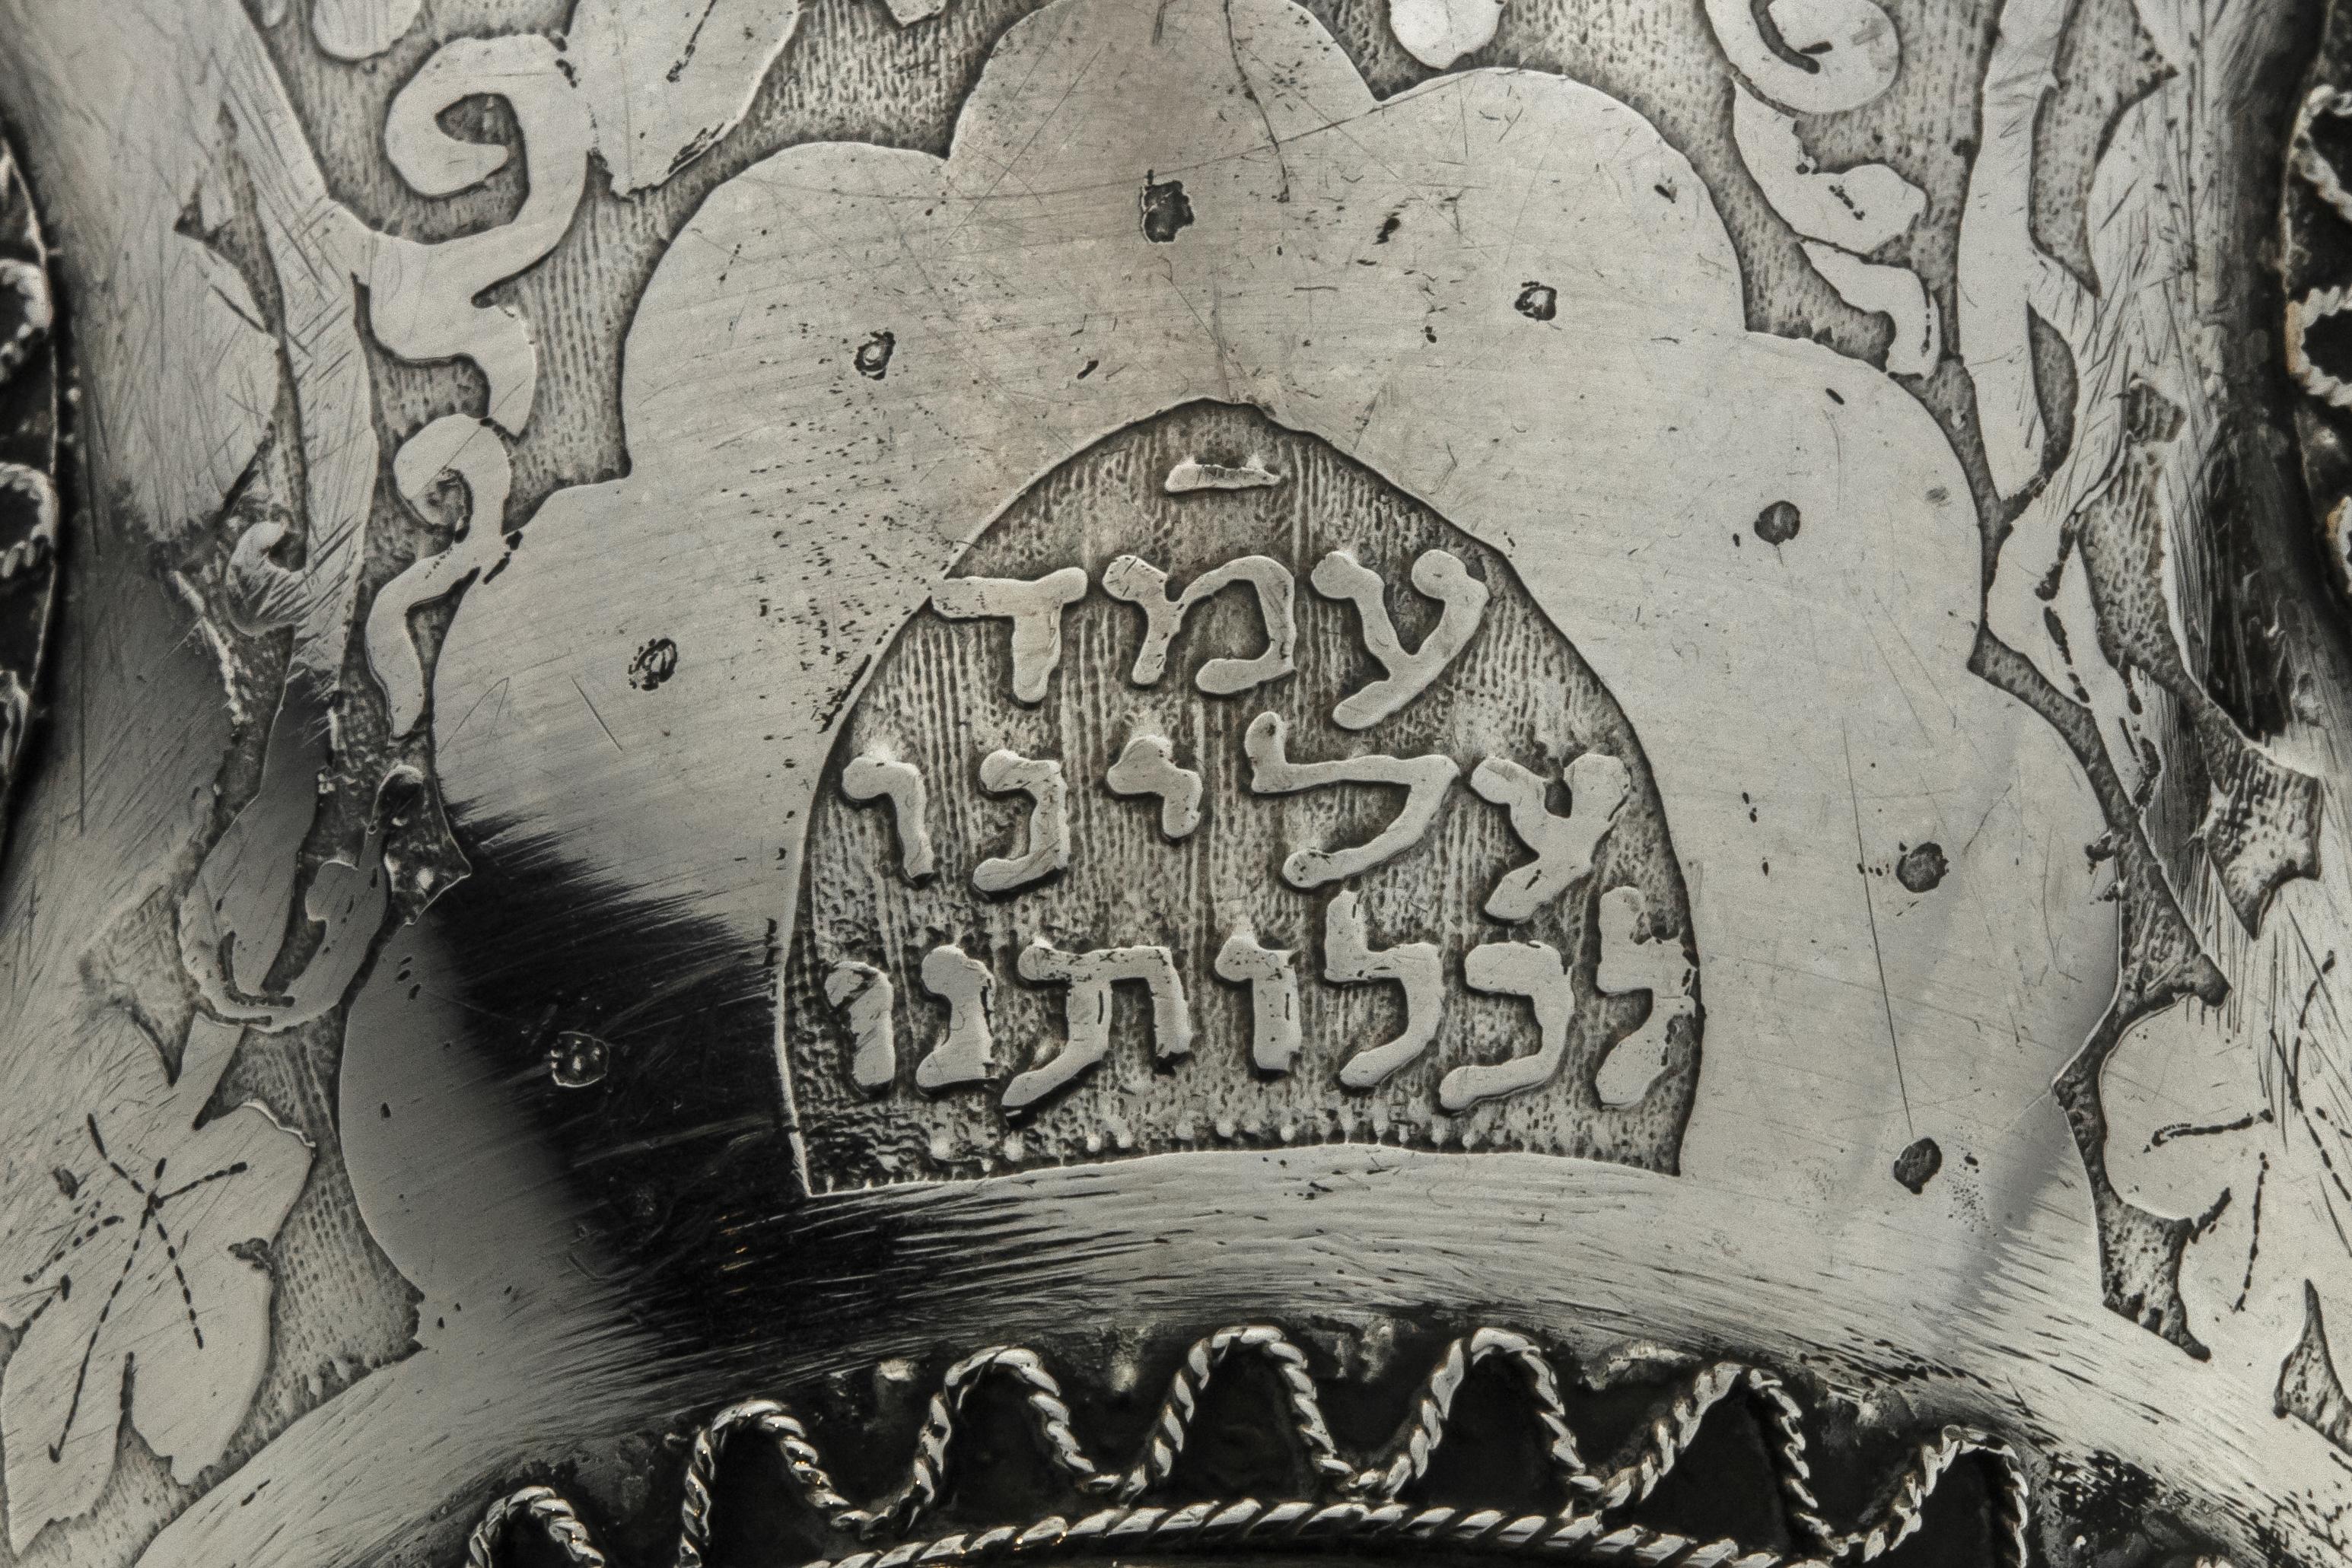 Large handmade sterling silver Passover goblet by Bezalel School, Jerusalem, circa 1950.
On round base decorated with silver filigree. The stem fitted with Bezalel insignia. The upper portion is acid etched with vine and grapes, decorated with